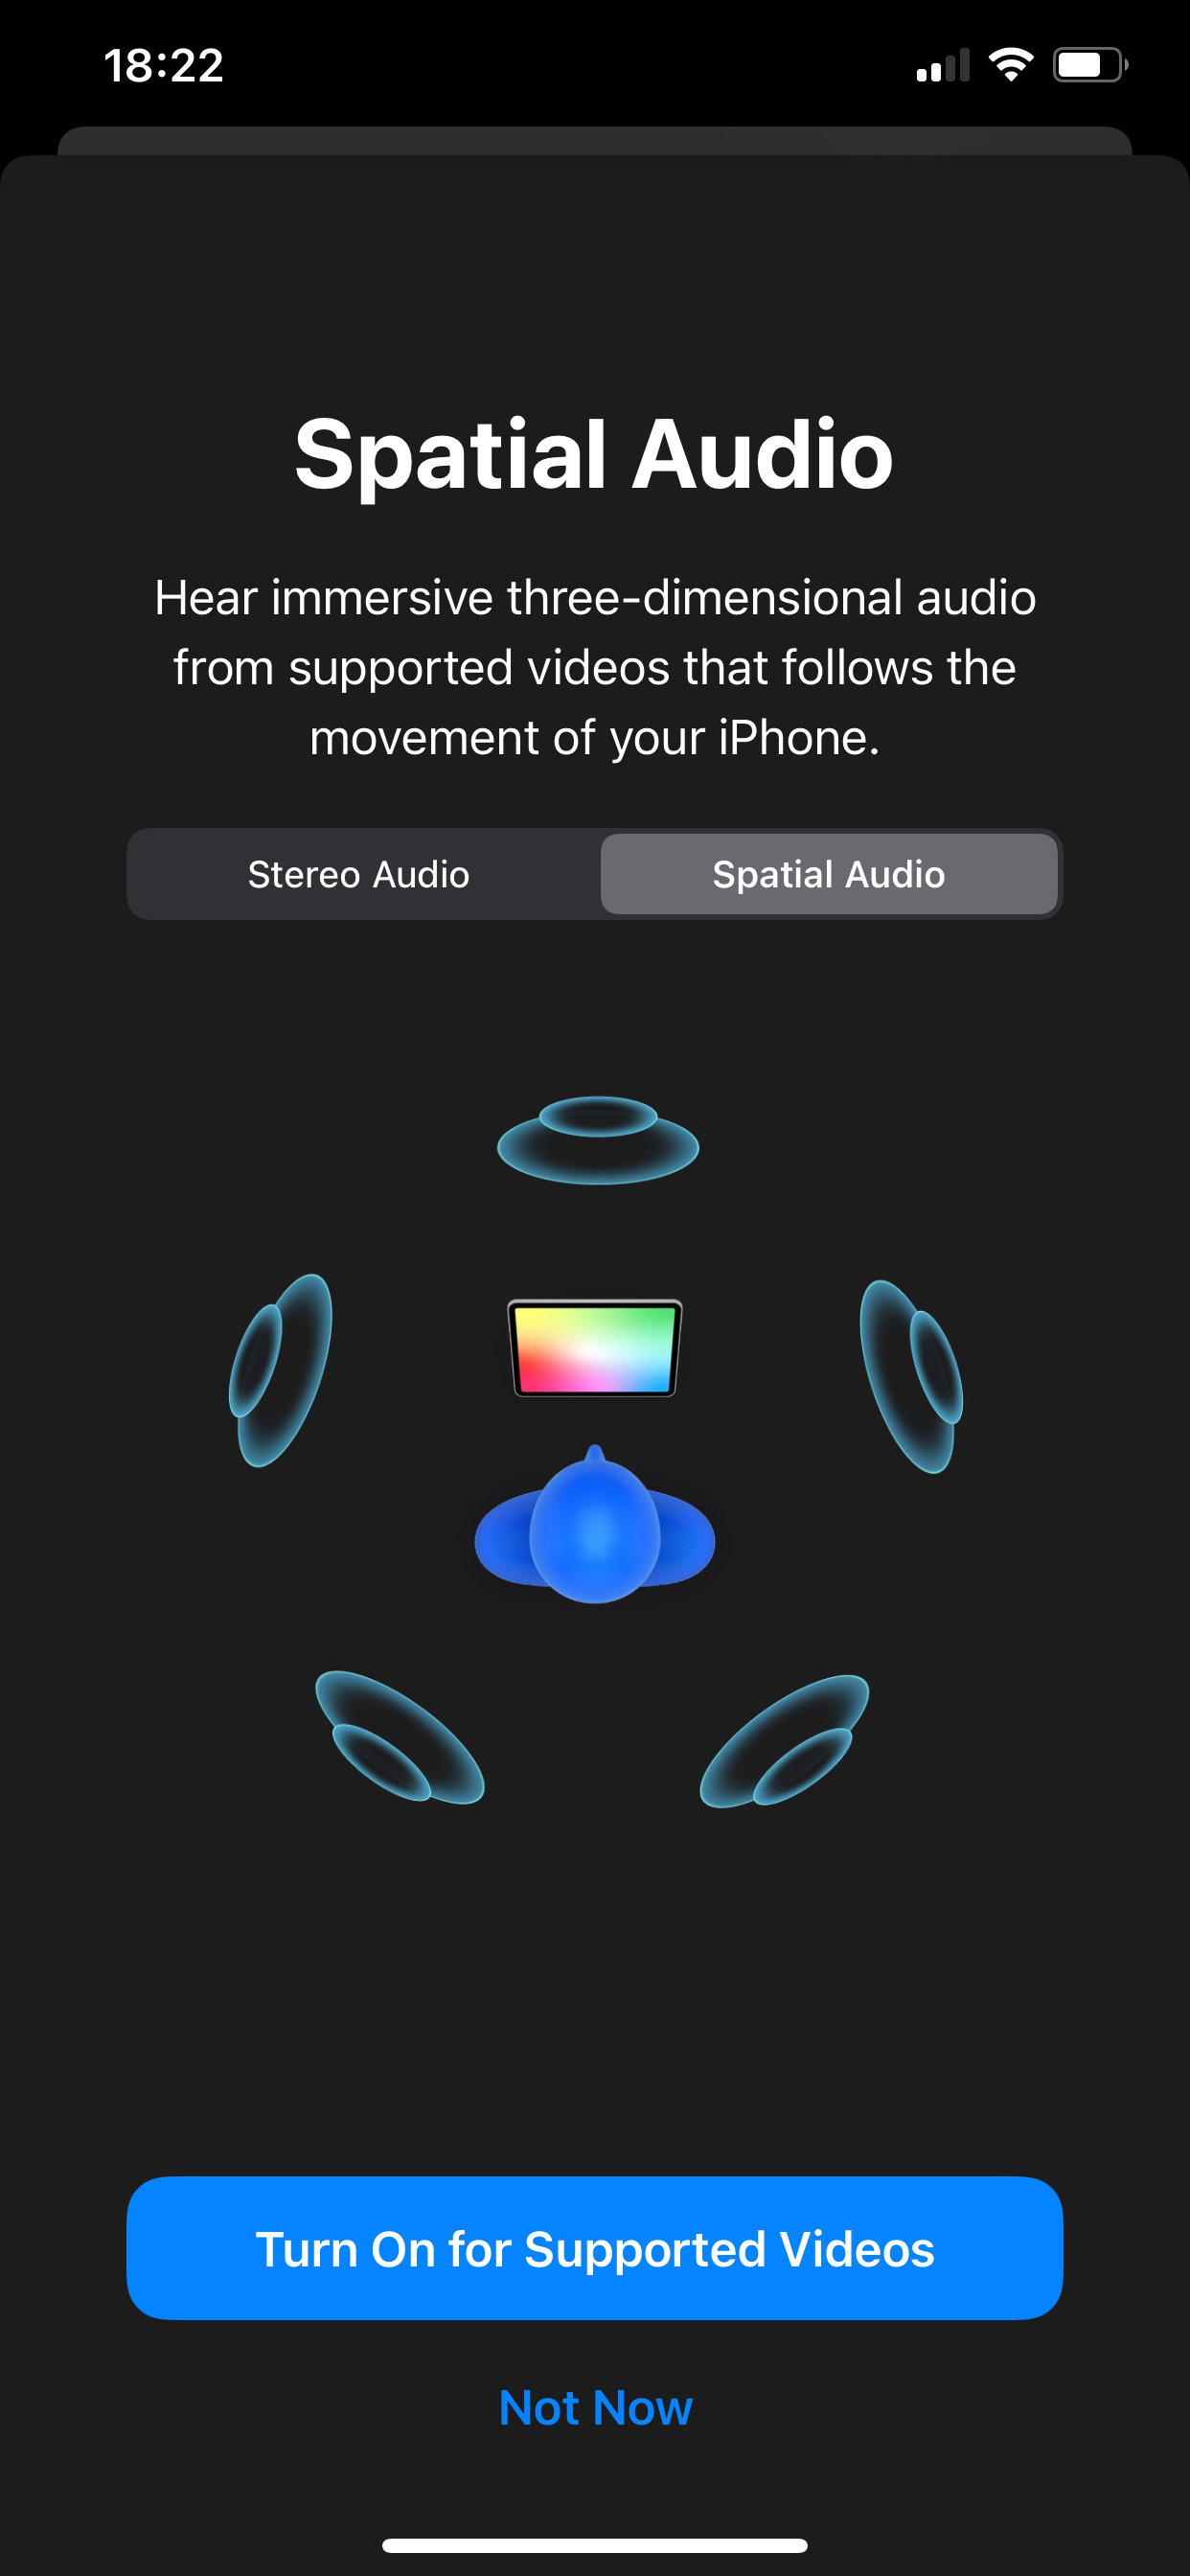 Spatial Audio enables immersive sound on AirPods Pro